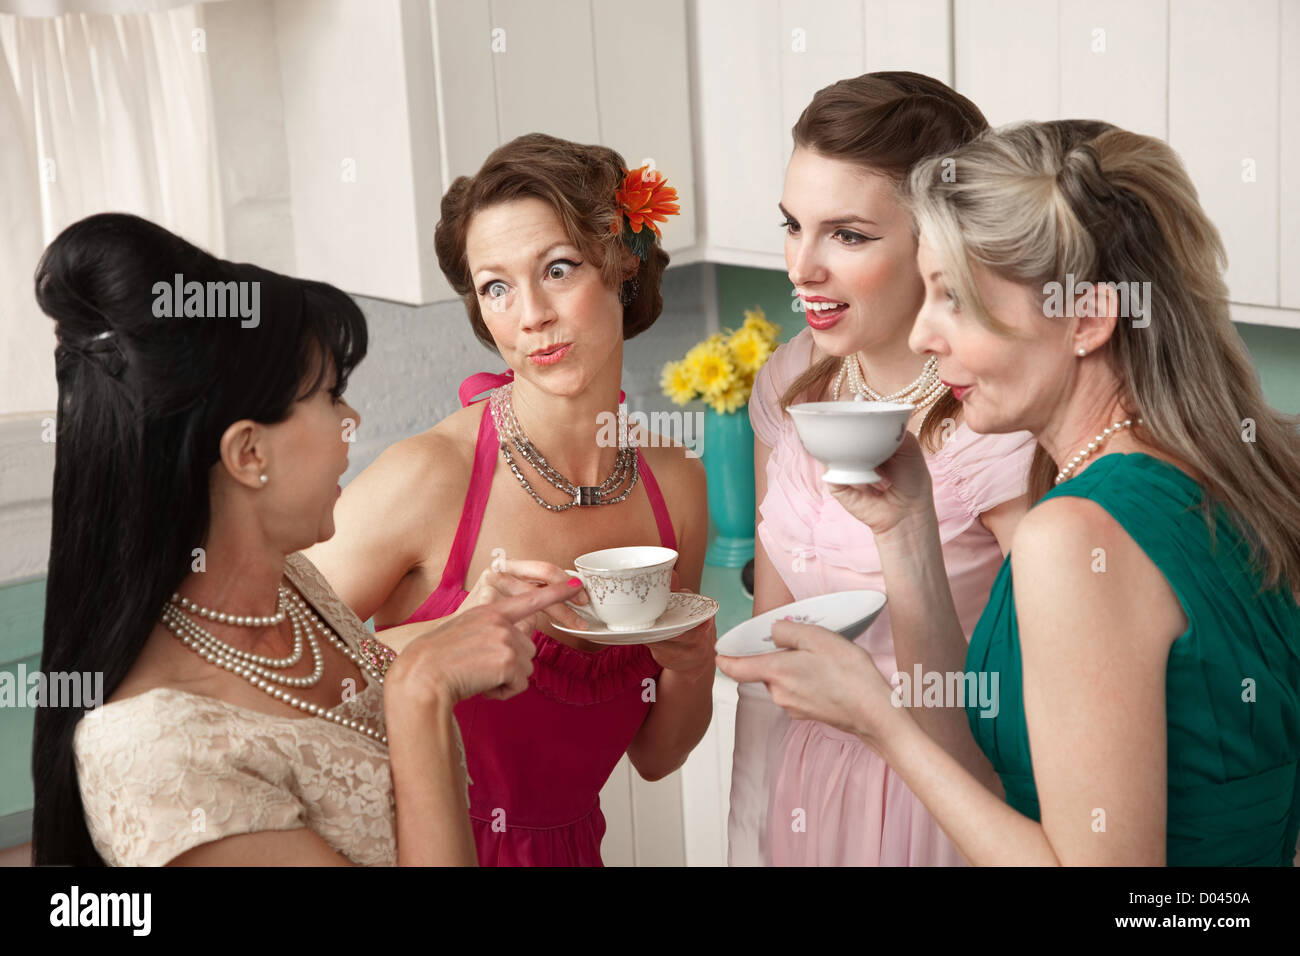 Four retro-styled women chit-chat over coffee in a kitchen Stock Photo